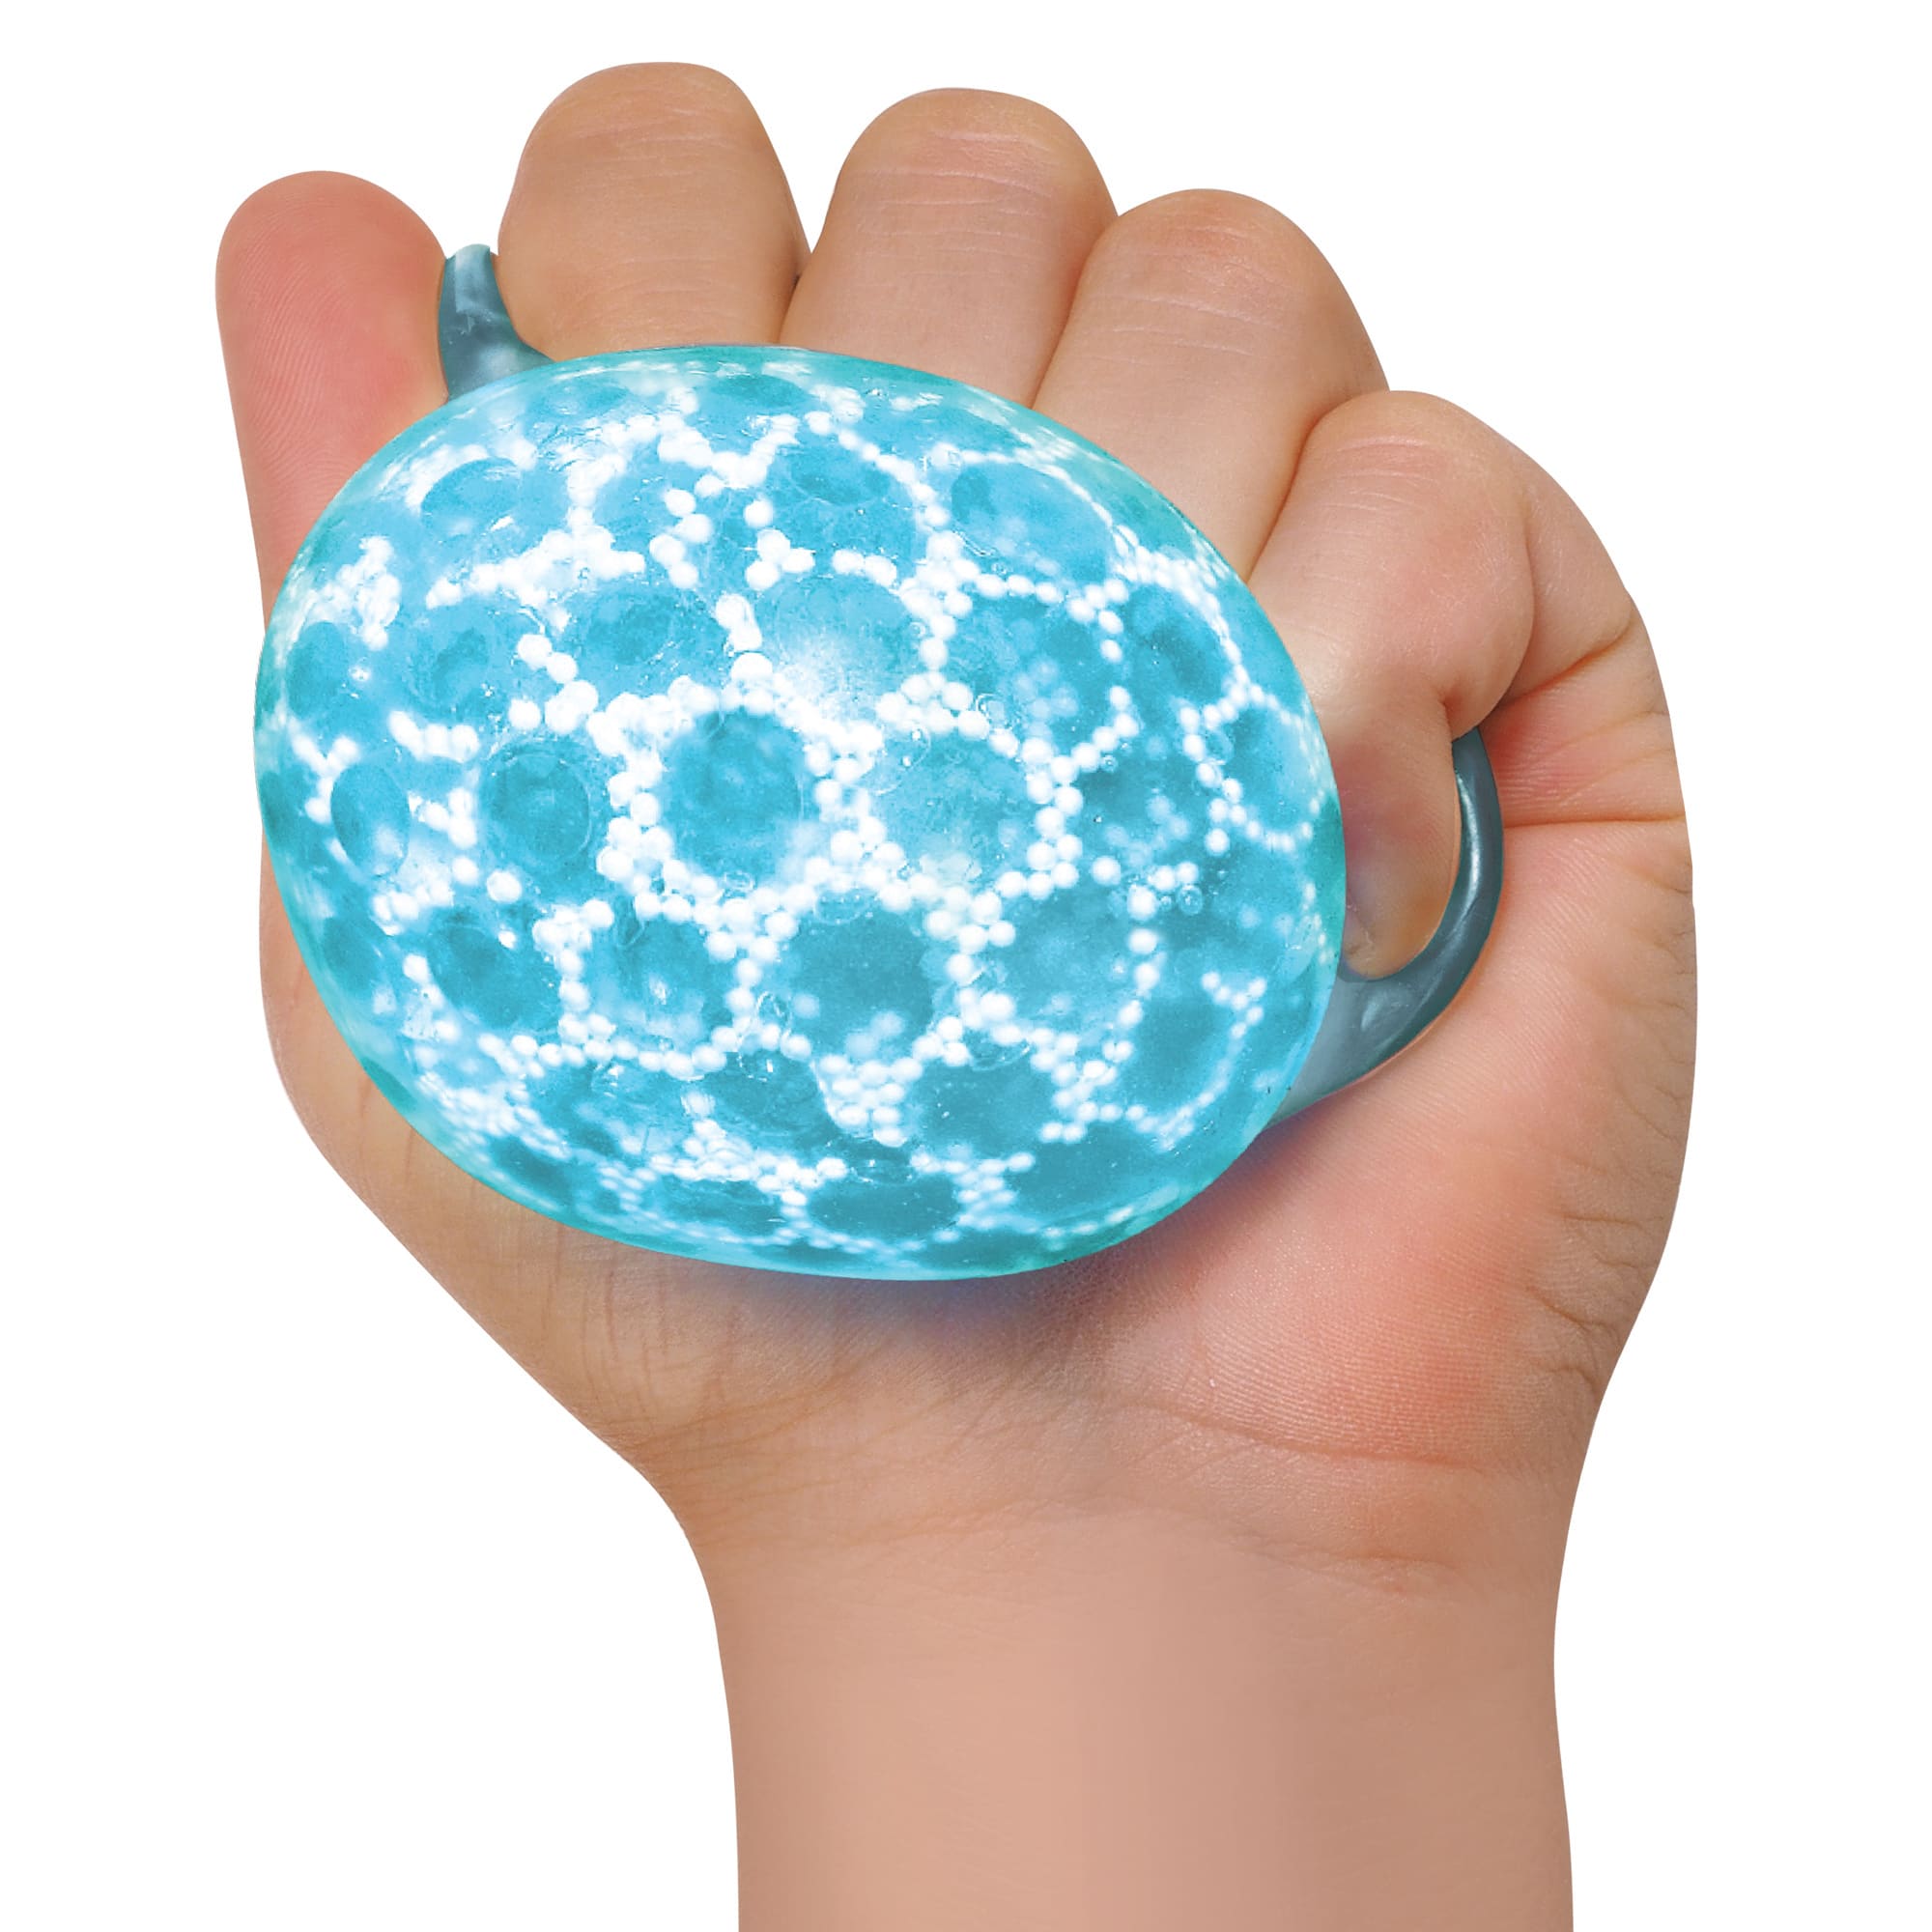 Schylling Atomic Nee Doh Squeeze Stress Ball ( one random pick on